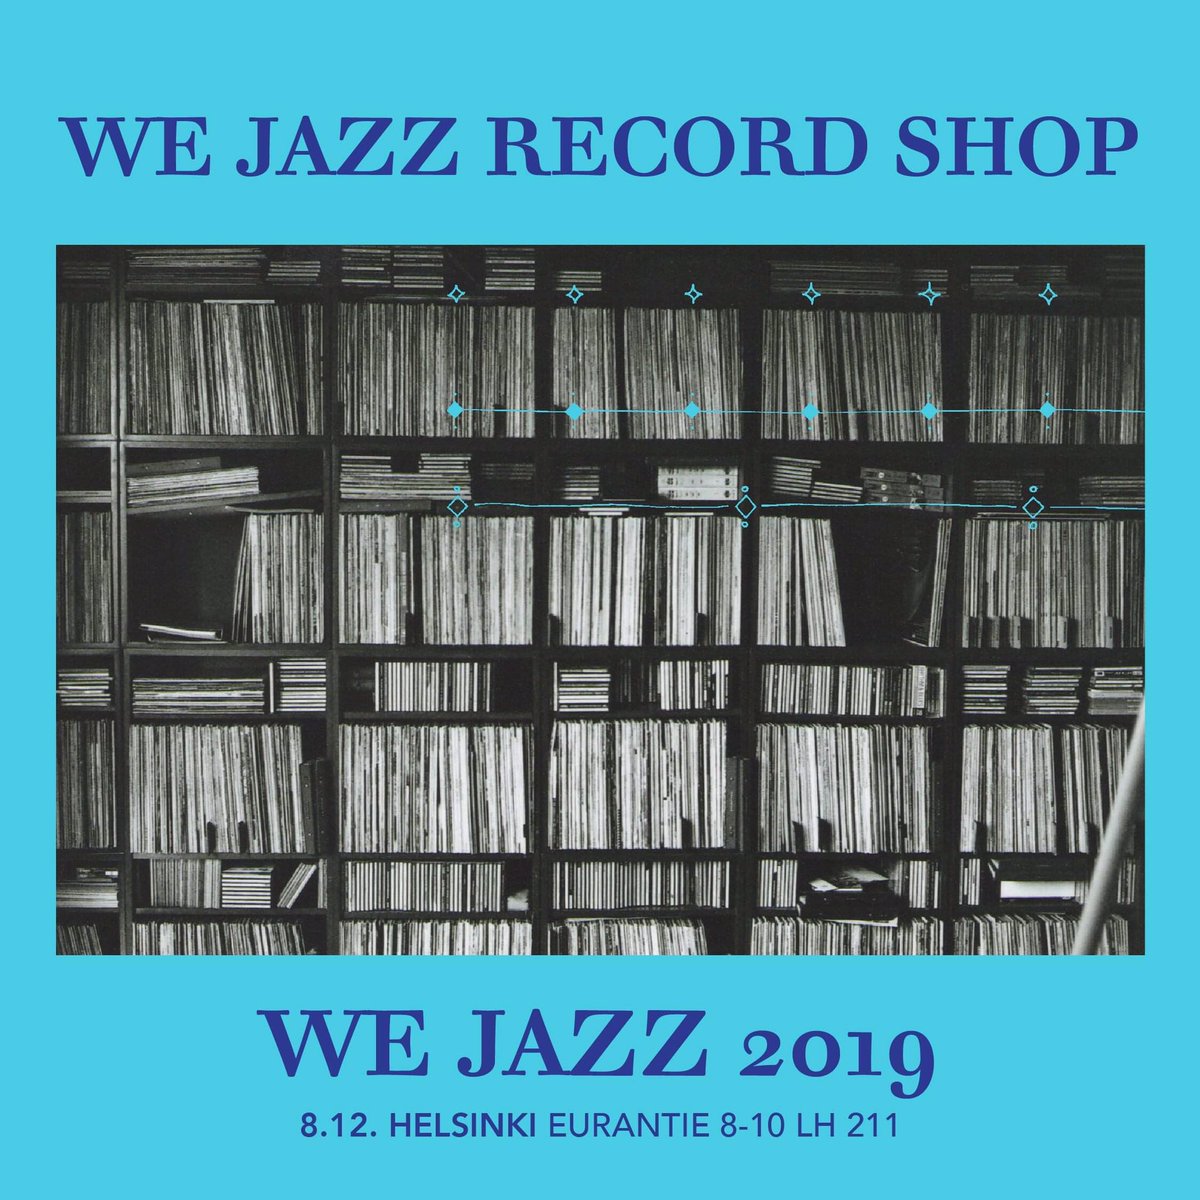 We Jazz Record Shop is open today from noon until 4pm. DJ @Dubbeldie spins tunes w/ We Jazz DJs. Free entry! #wejazz2019